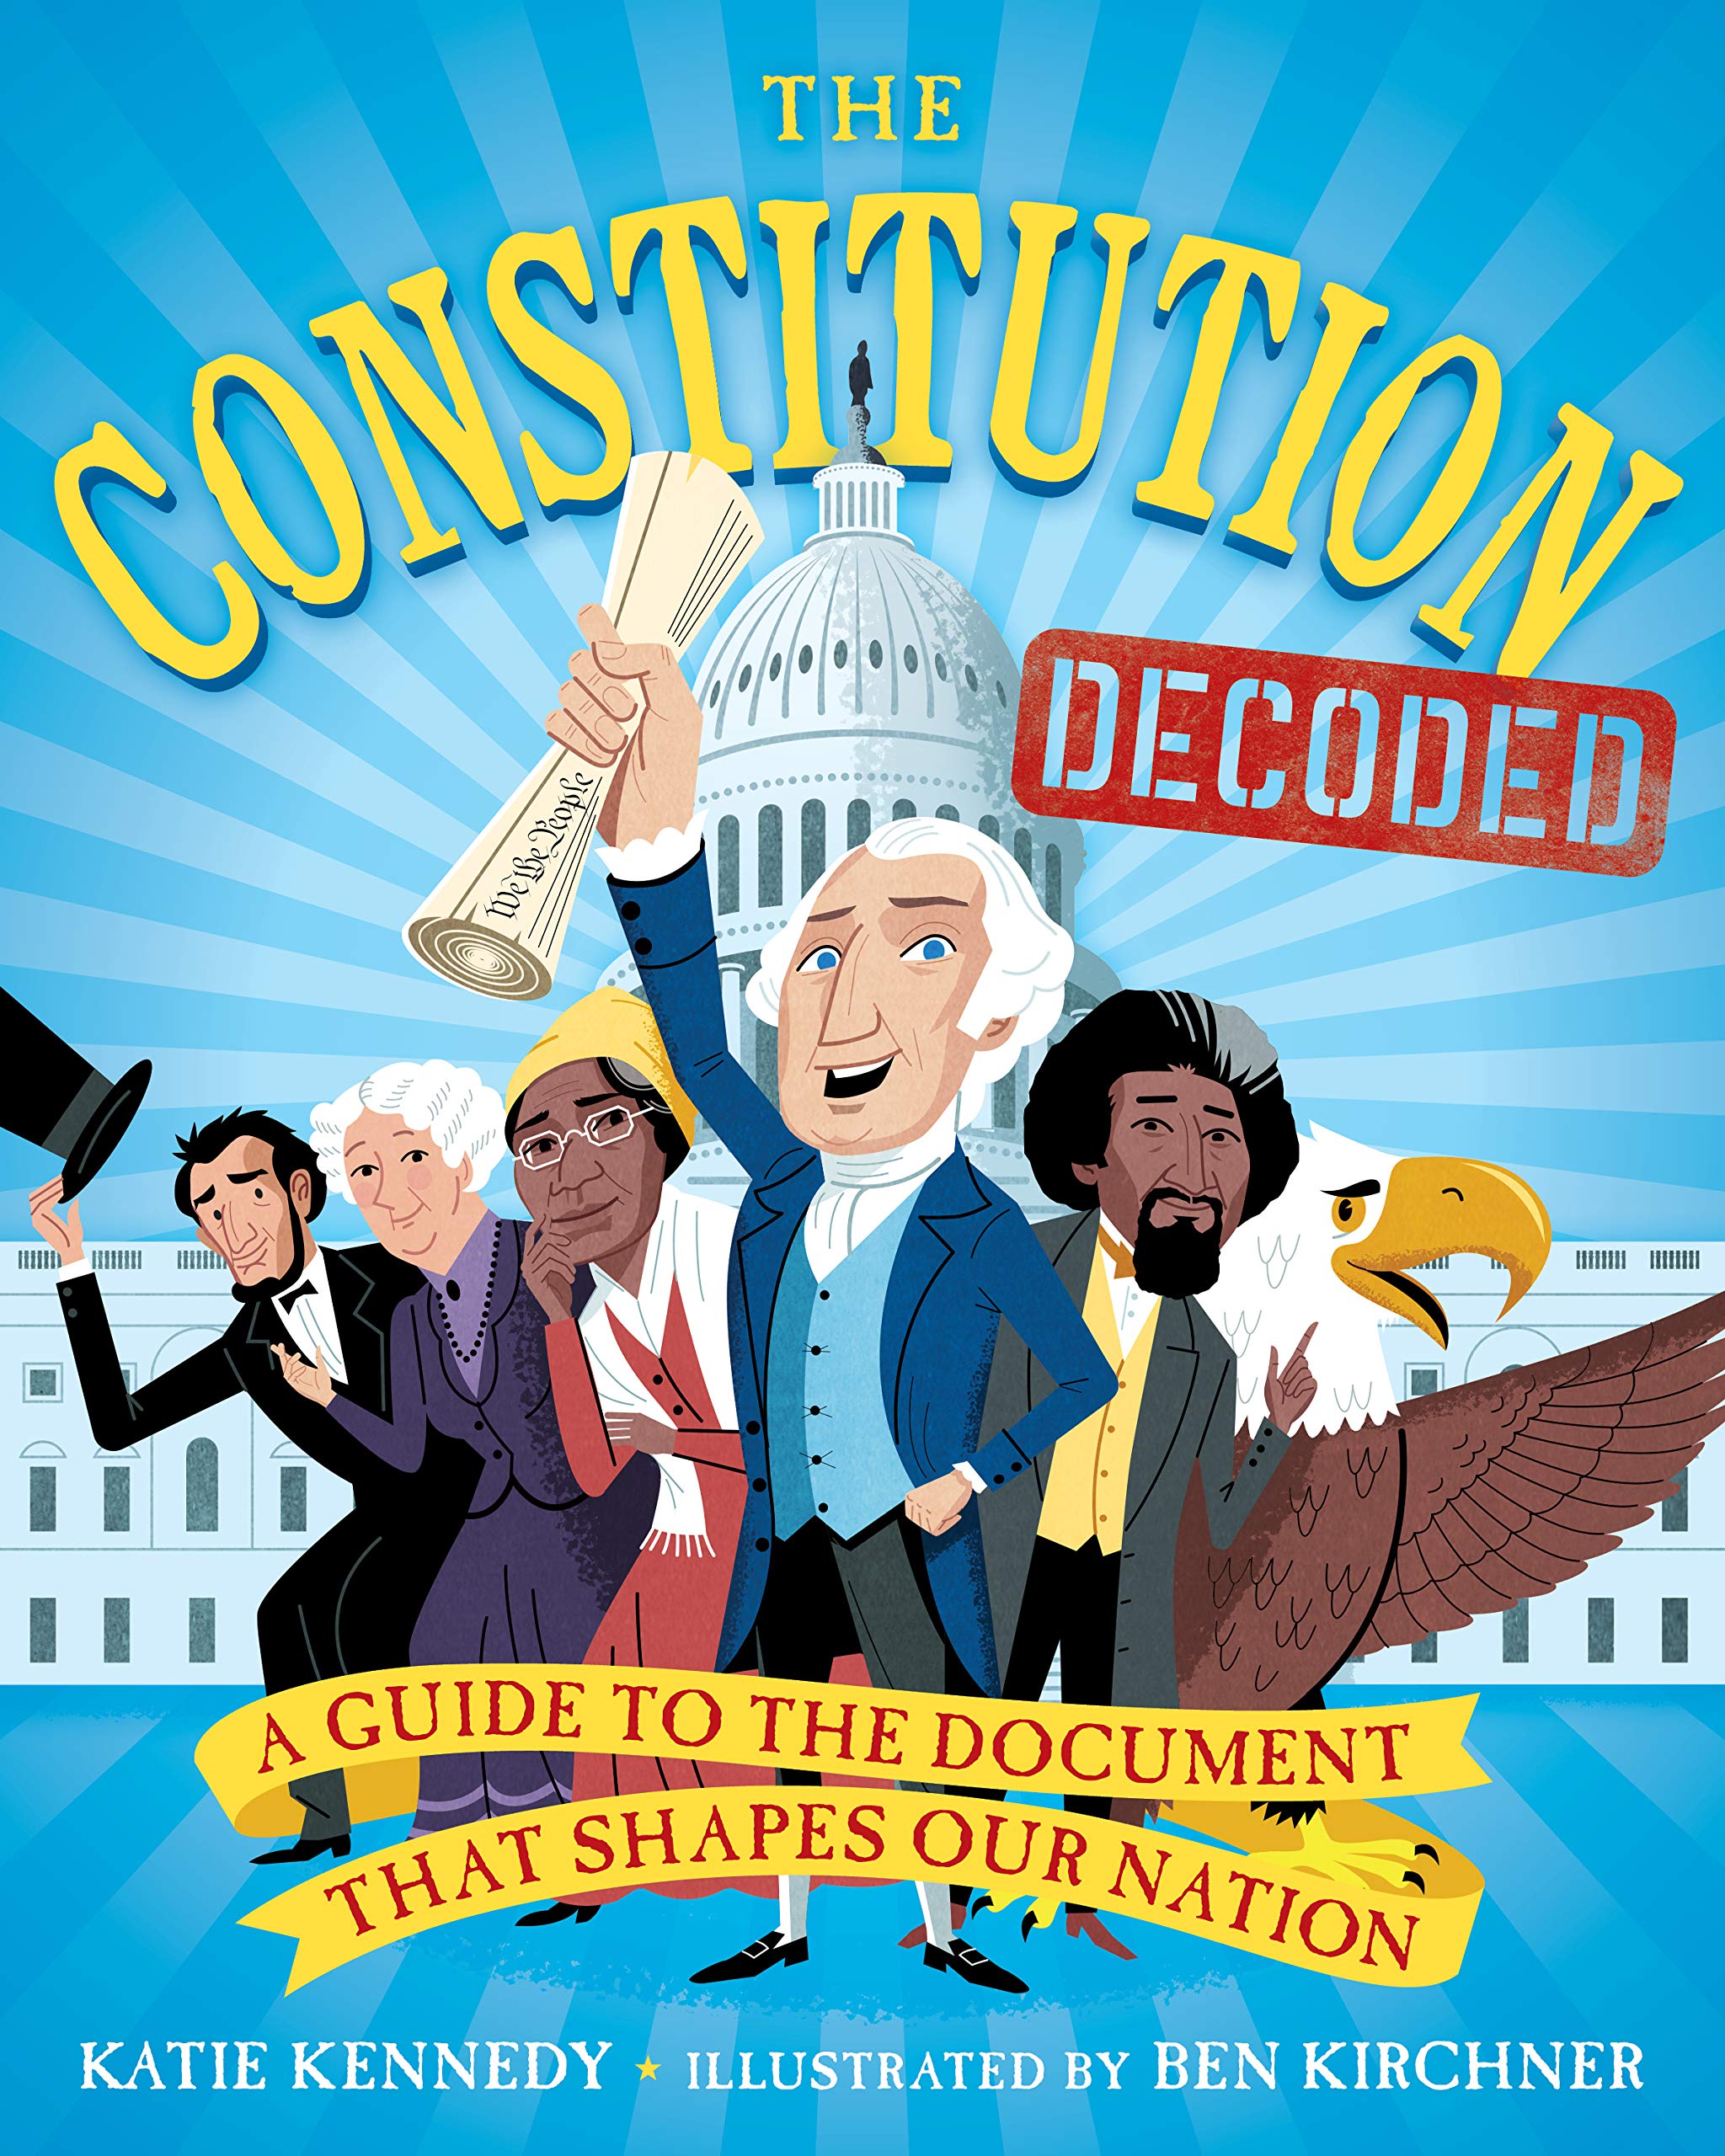 The Constituion Decoded: A Guide to the Document That Shapes Our Nation